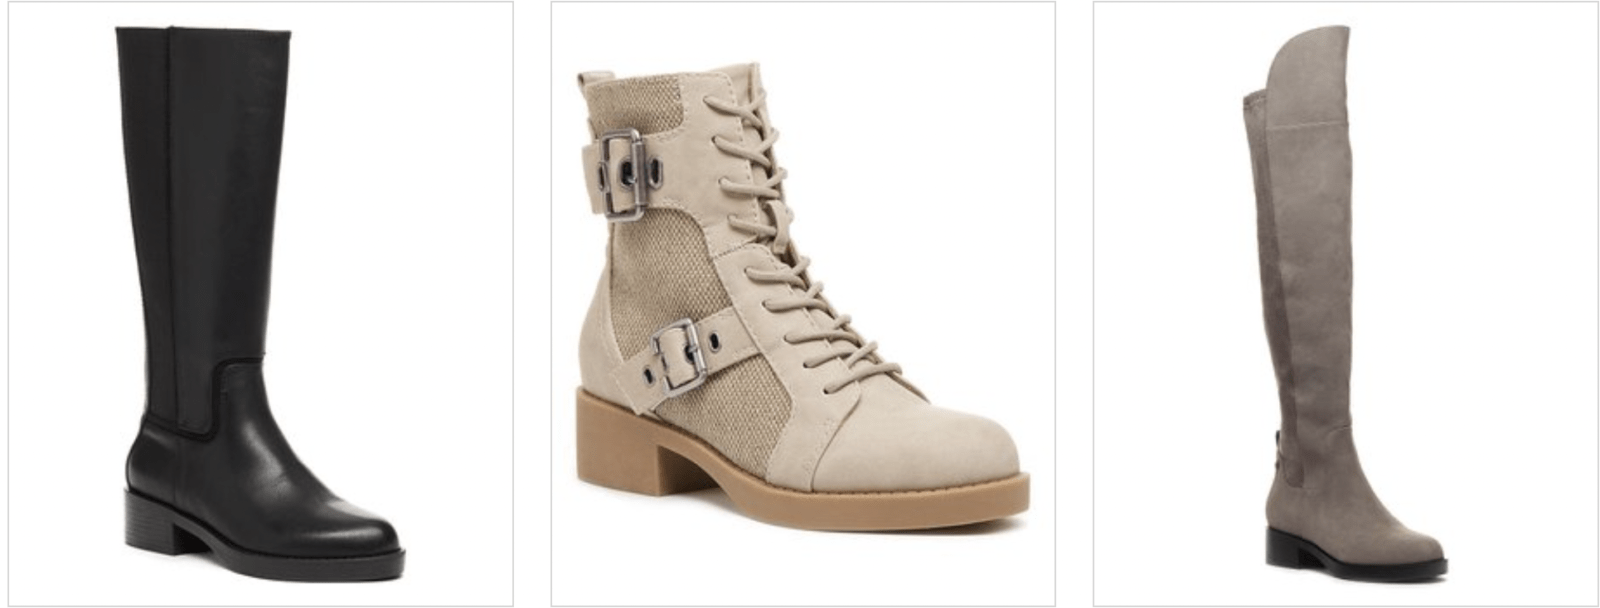 Screen Shot 2022 02 10 at 9.27.08 PM 1 - Women's Rocket Dog Sneakers, Boots & Booties as low as $20 (GREAT PRICES — Reg. $80)